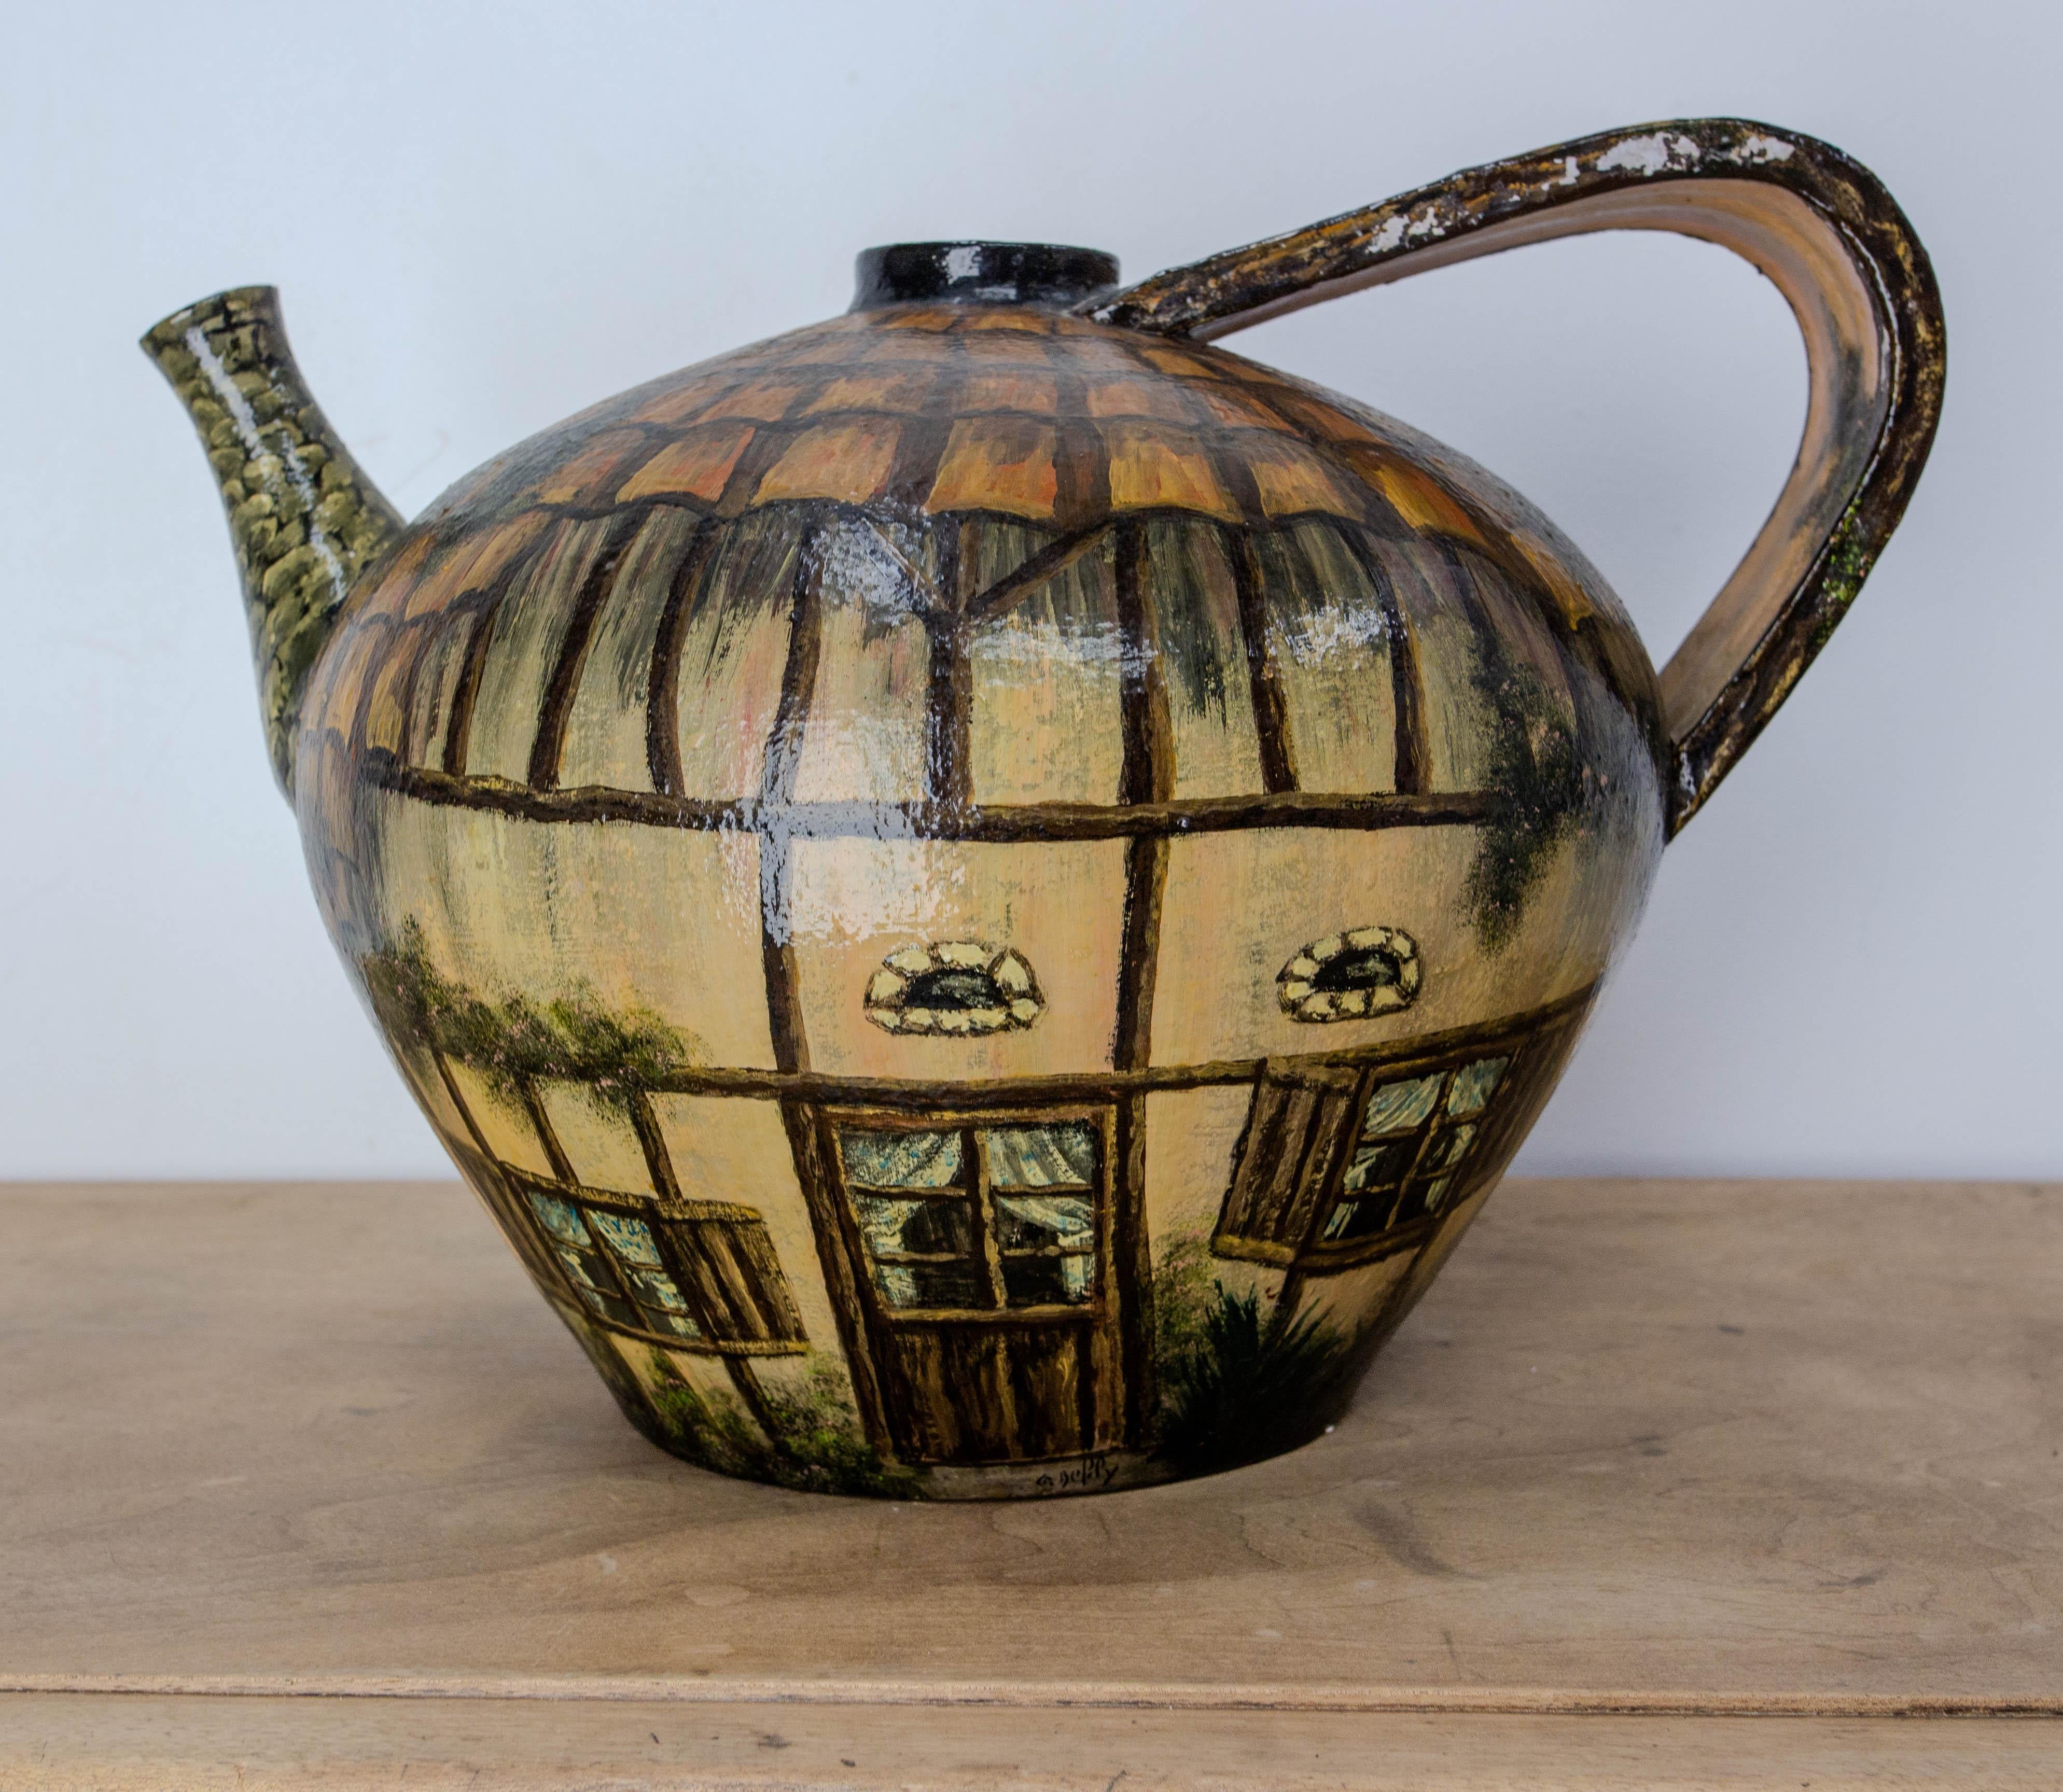 Antique terracotta jug French Basque hand painted signed by Artist.
This terracotta pitcher from Basque Country was later painted, circa 1970.
Good and heavy.
Oil paints with white under coat.
In the 19th century, this pitcher was used to keep the